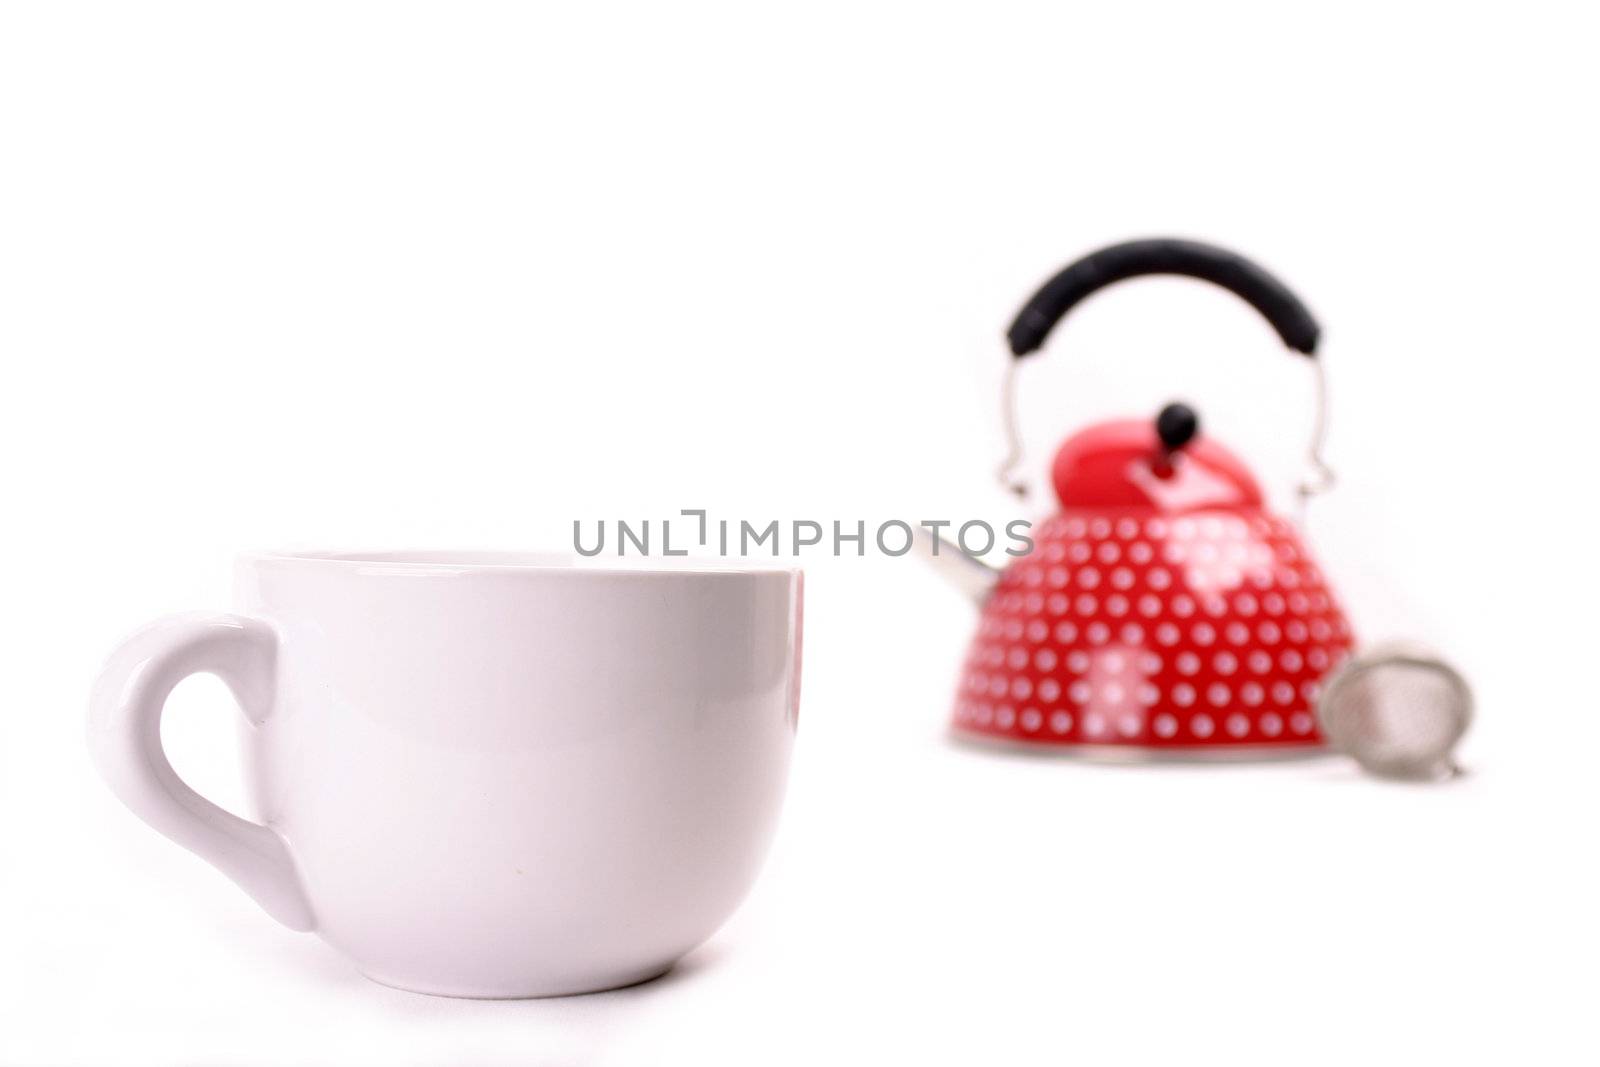 Cup in the foregrund and red teapot in the background